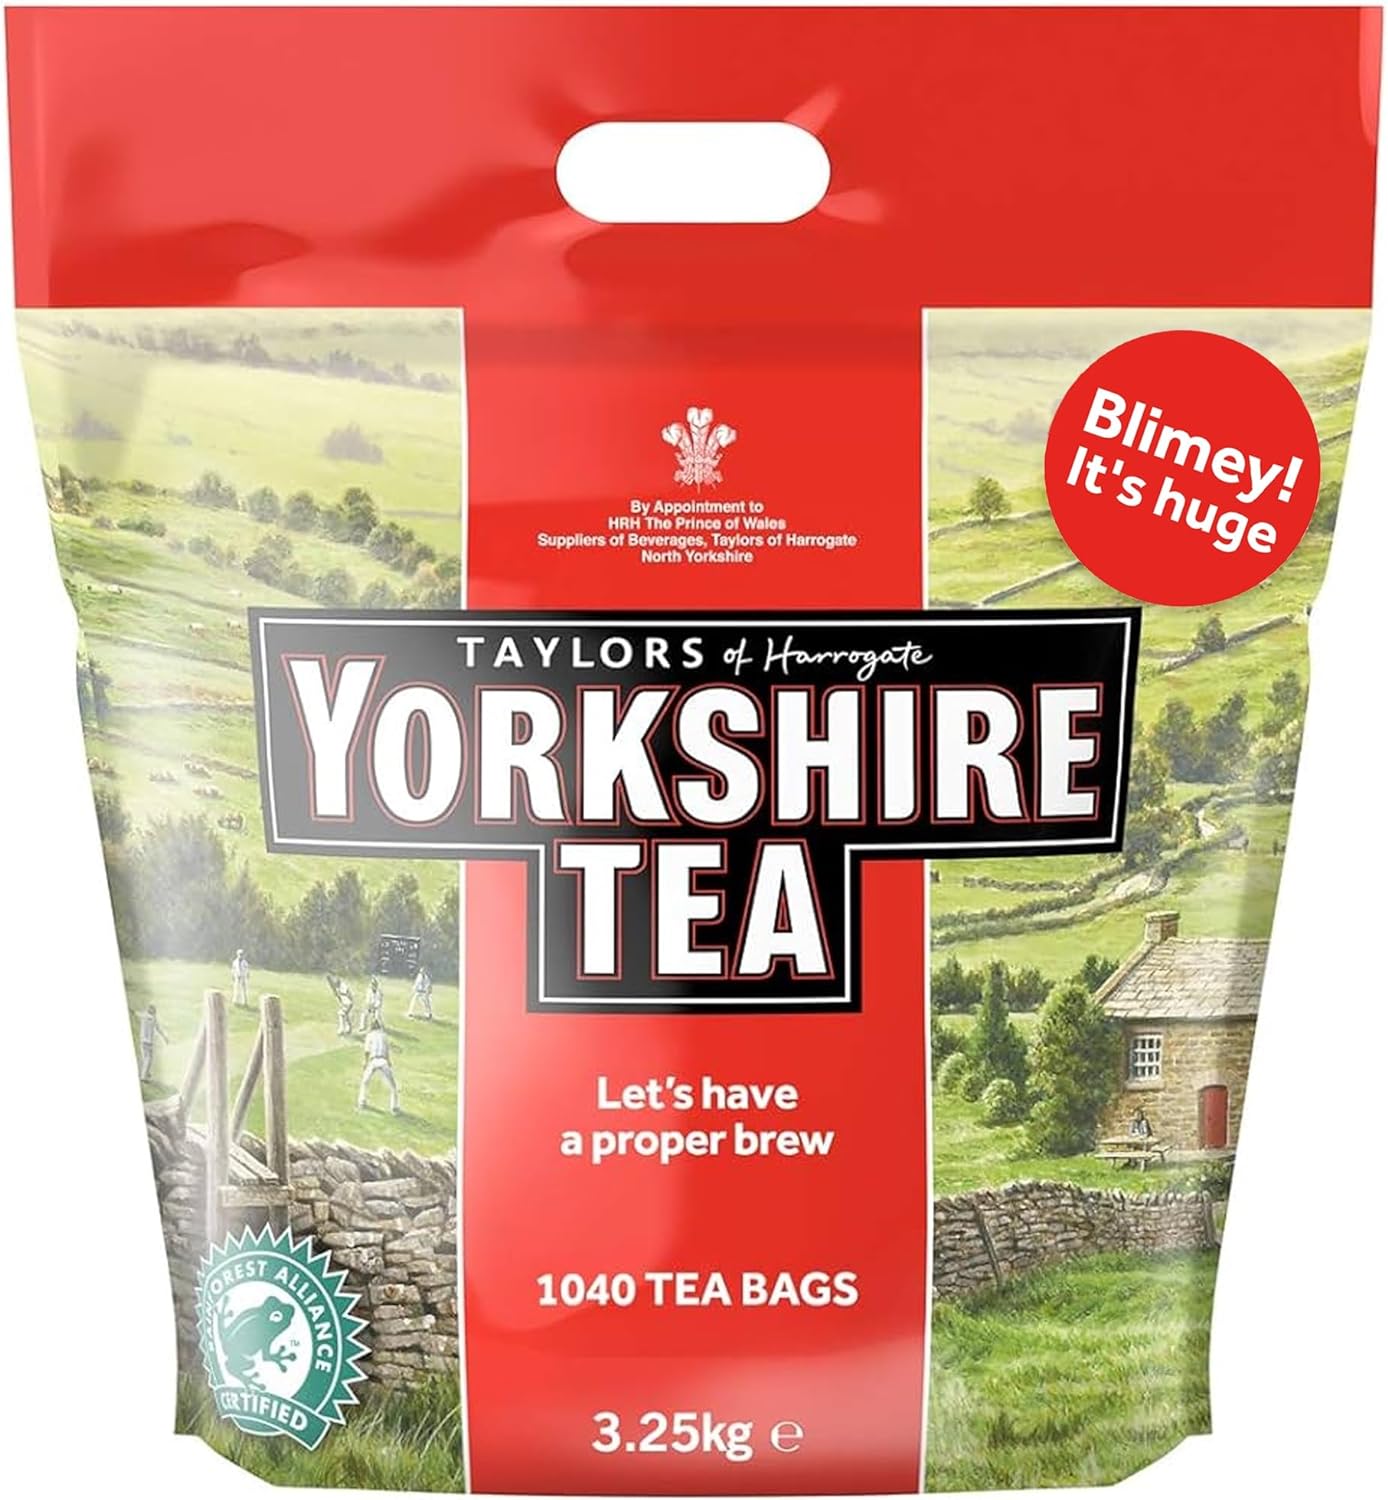 Yorkshire Tea: One Cup Tea Bags - 1040 Bags